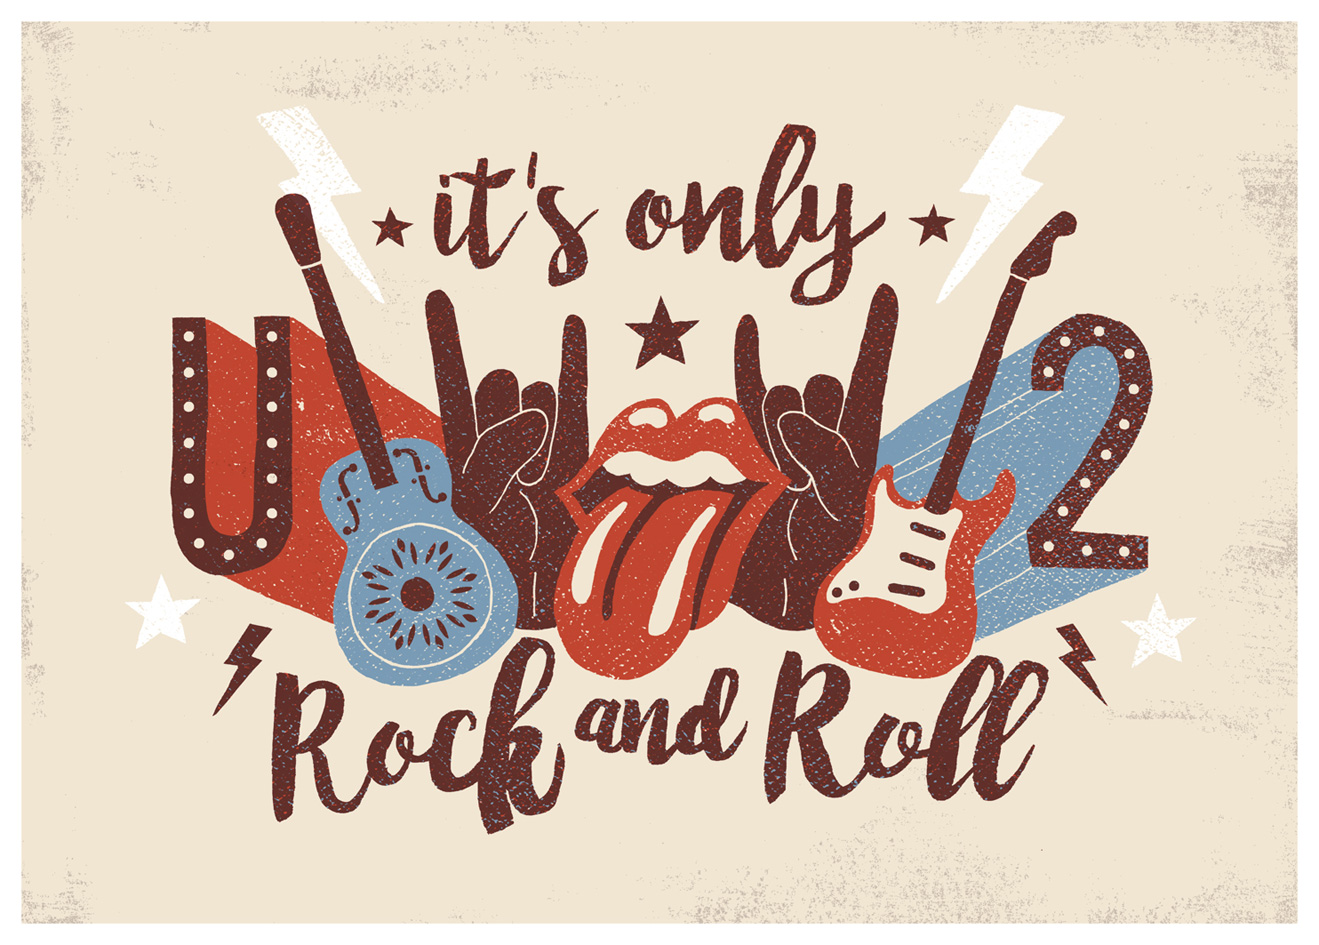 Daniel Diosdado: It's only Rock and Roll